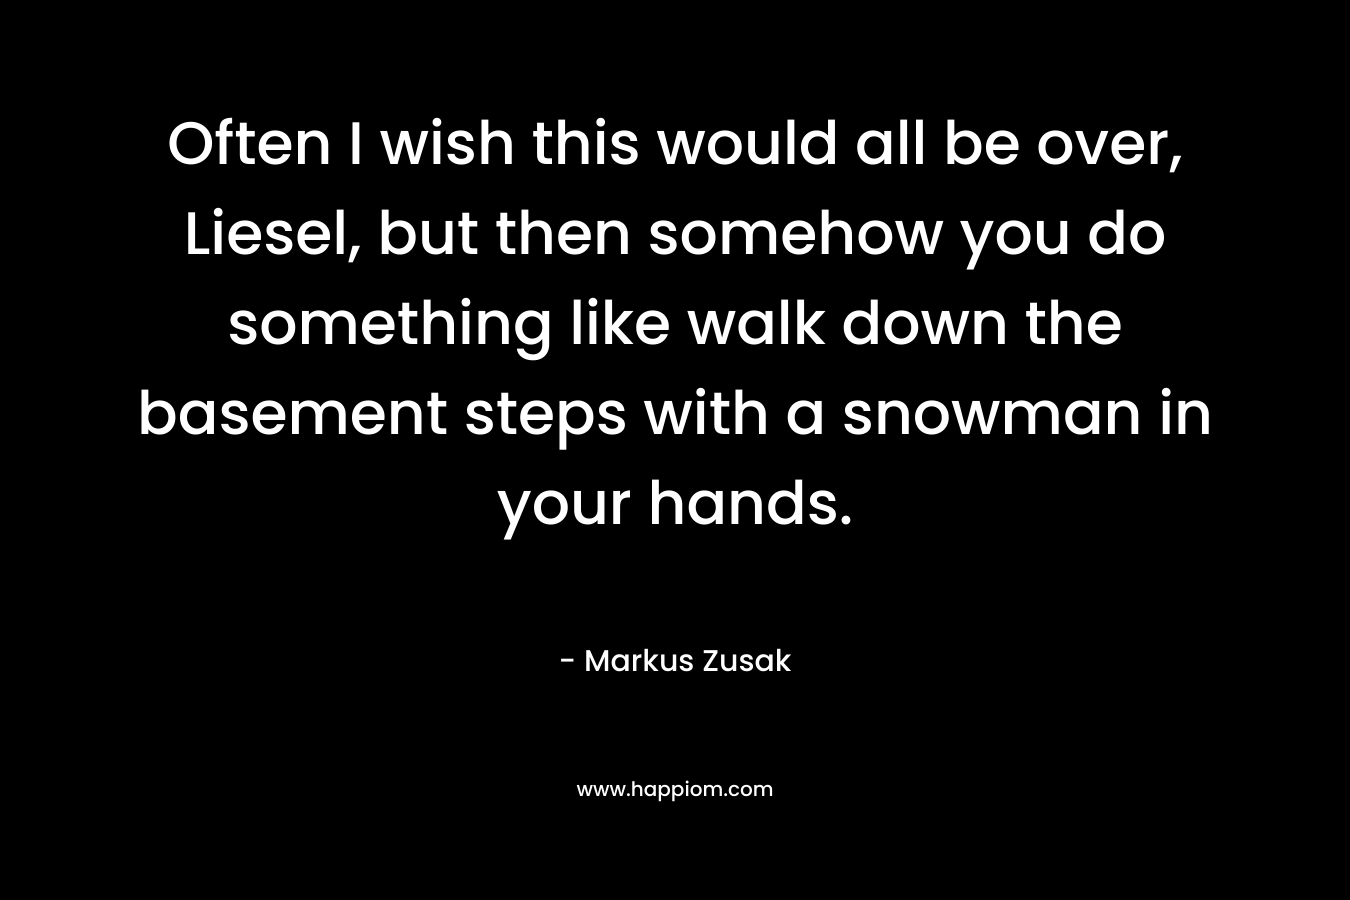 Often I wish this would all be over, Liesel, but then somehow you do something like walk down the basement steps with a snowman in your hands. – Markus Zusak